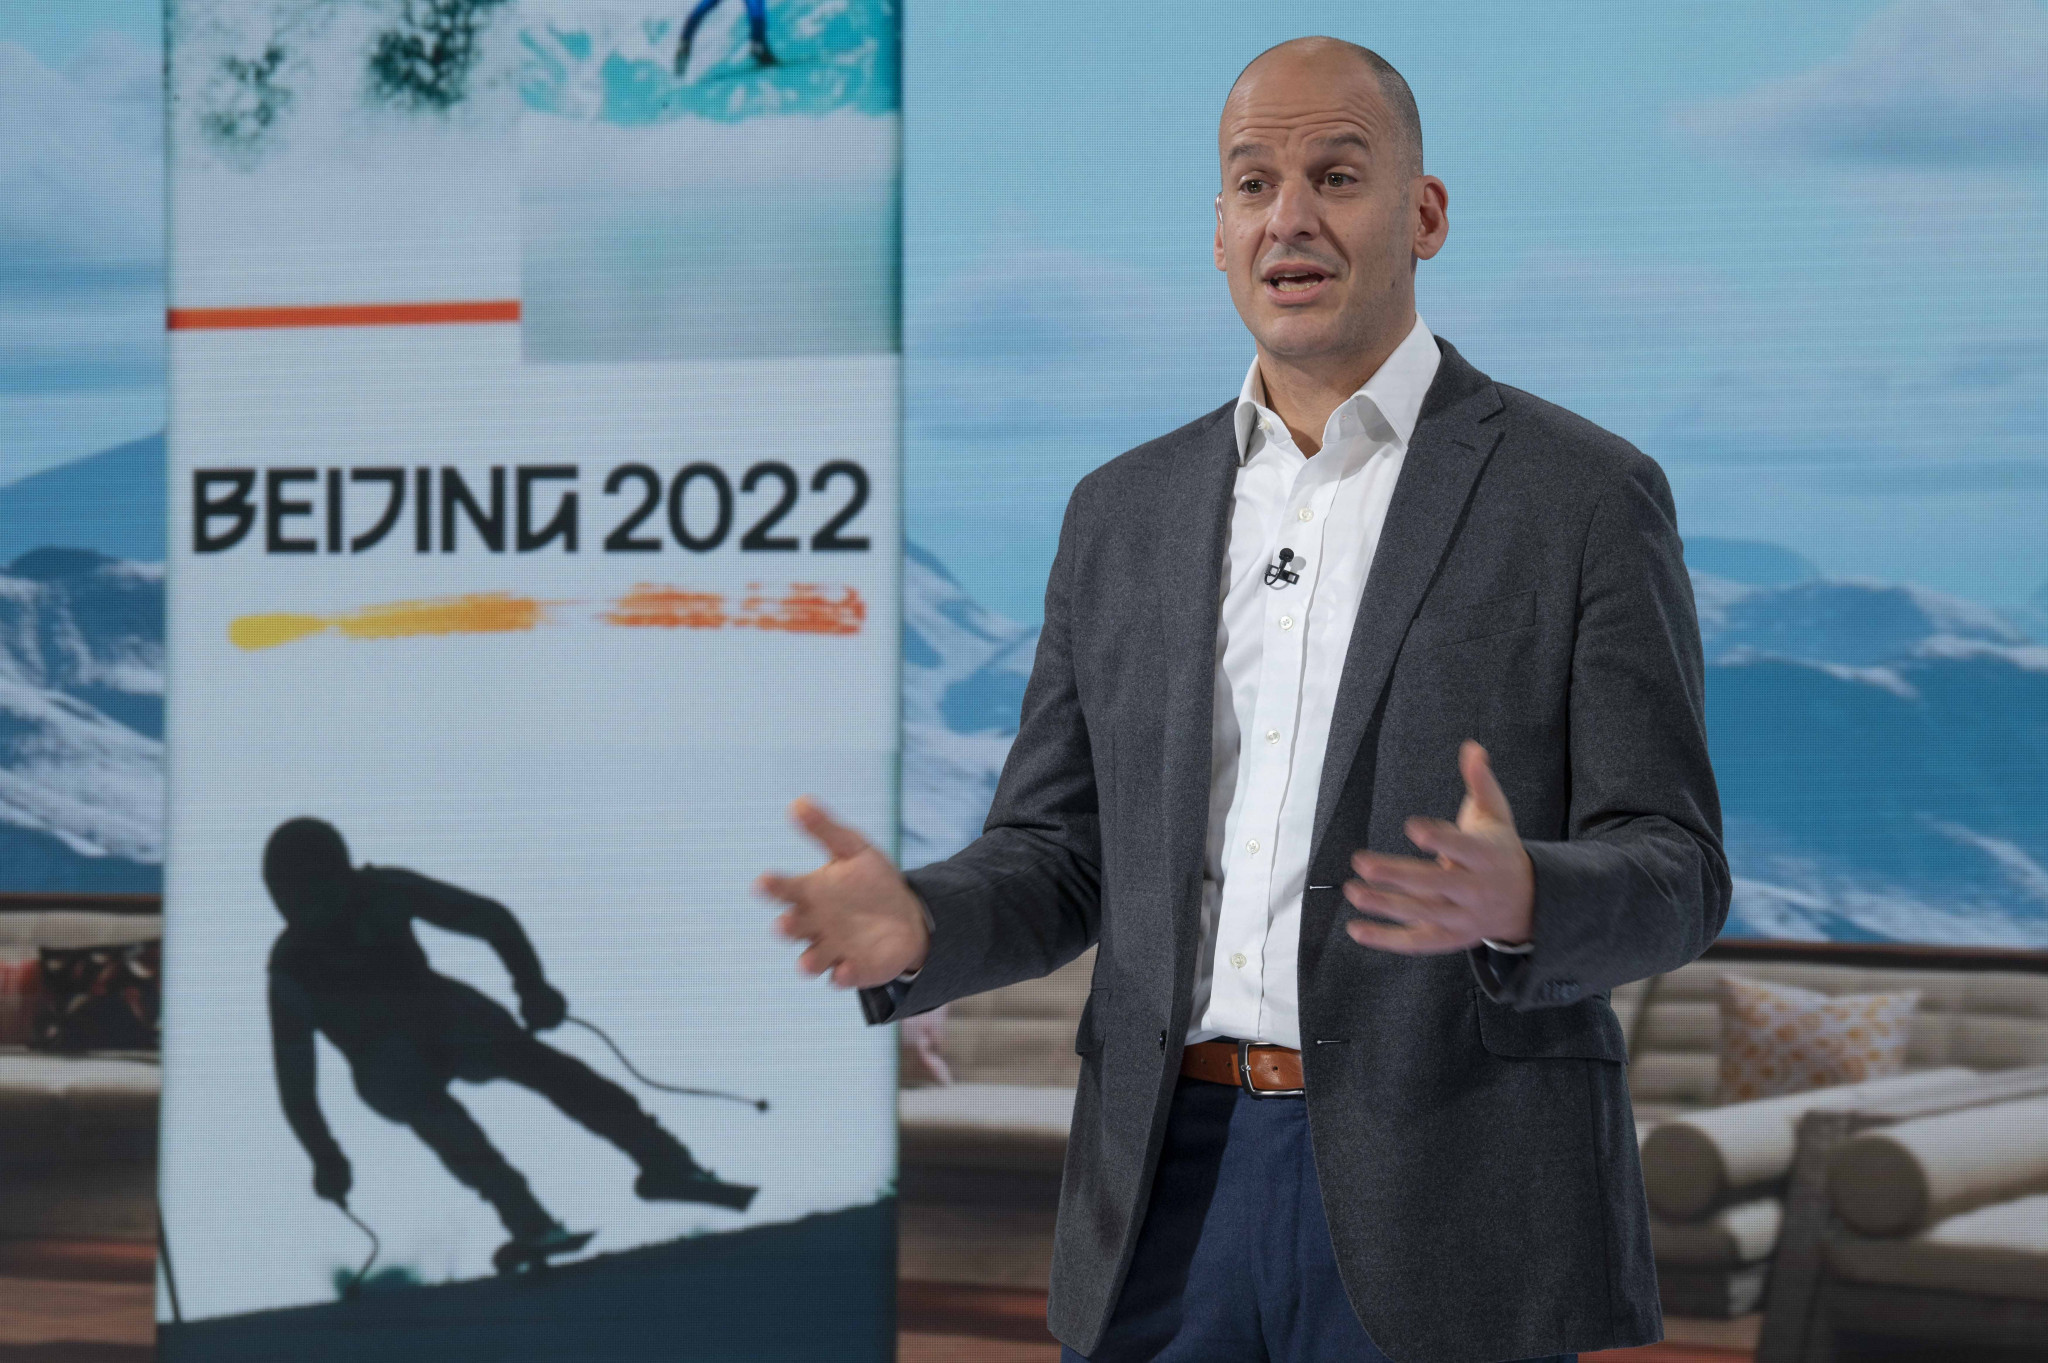 Discovery promise will not "shy away" from human rights concerns during Beijing 2022 coverage